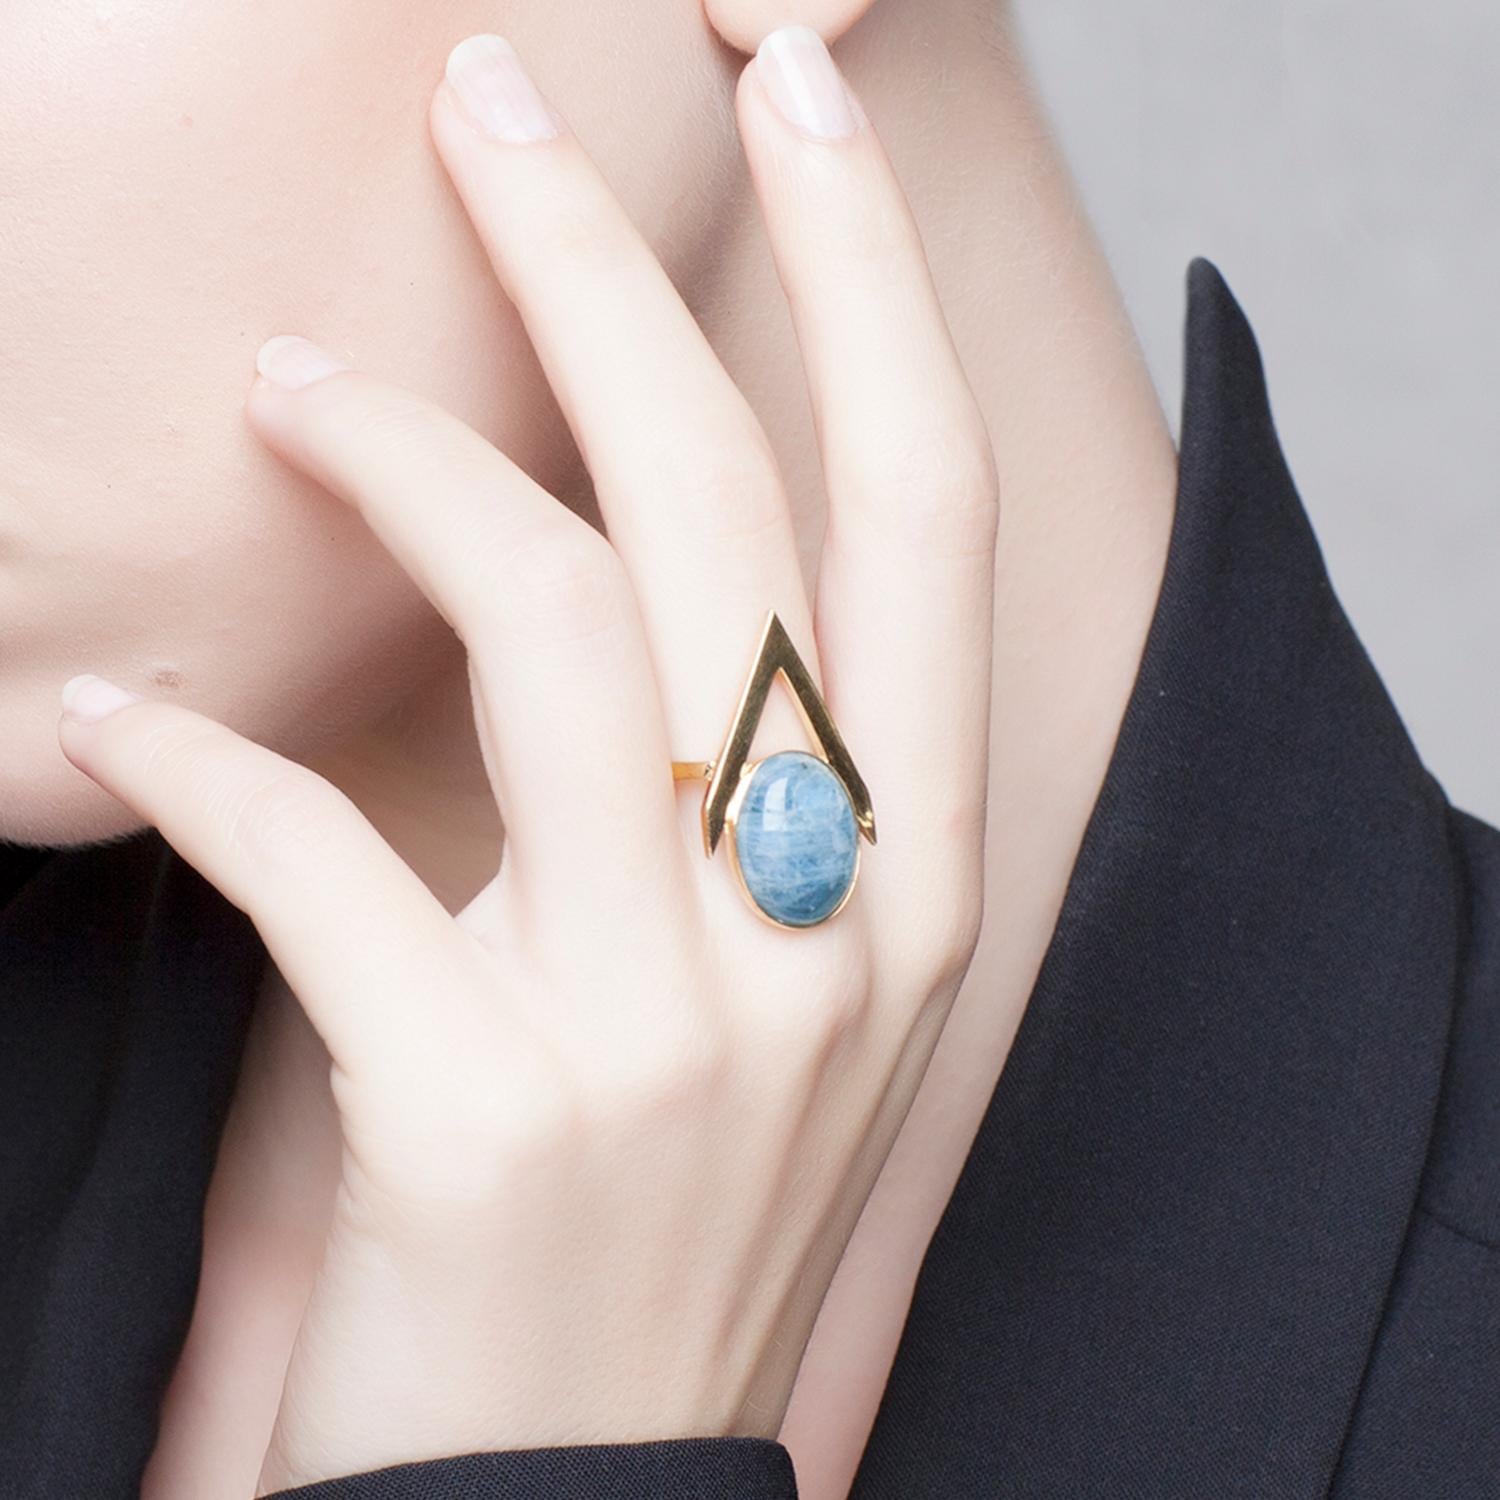 Add jewellery with a modern, feminine attitude to your outfit with this 9 Karat gold ring from Iosselliani.  Crafted in Italy in 9 Karat gold, the ring features a medium sized pink opal cabochon framed into a V shape. Stone size 16 x 12 mm. Central